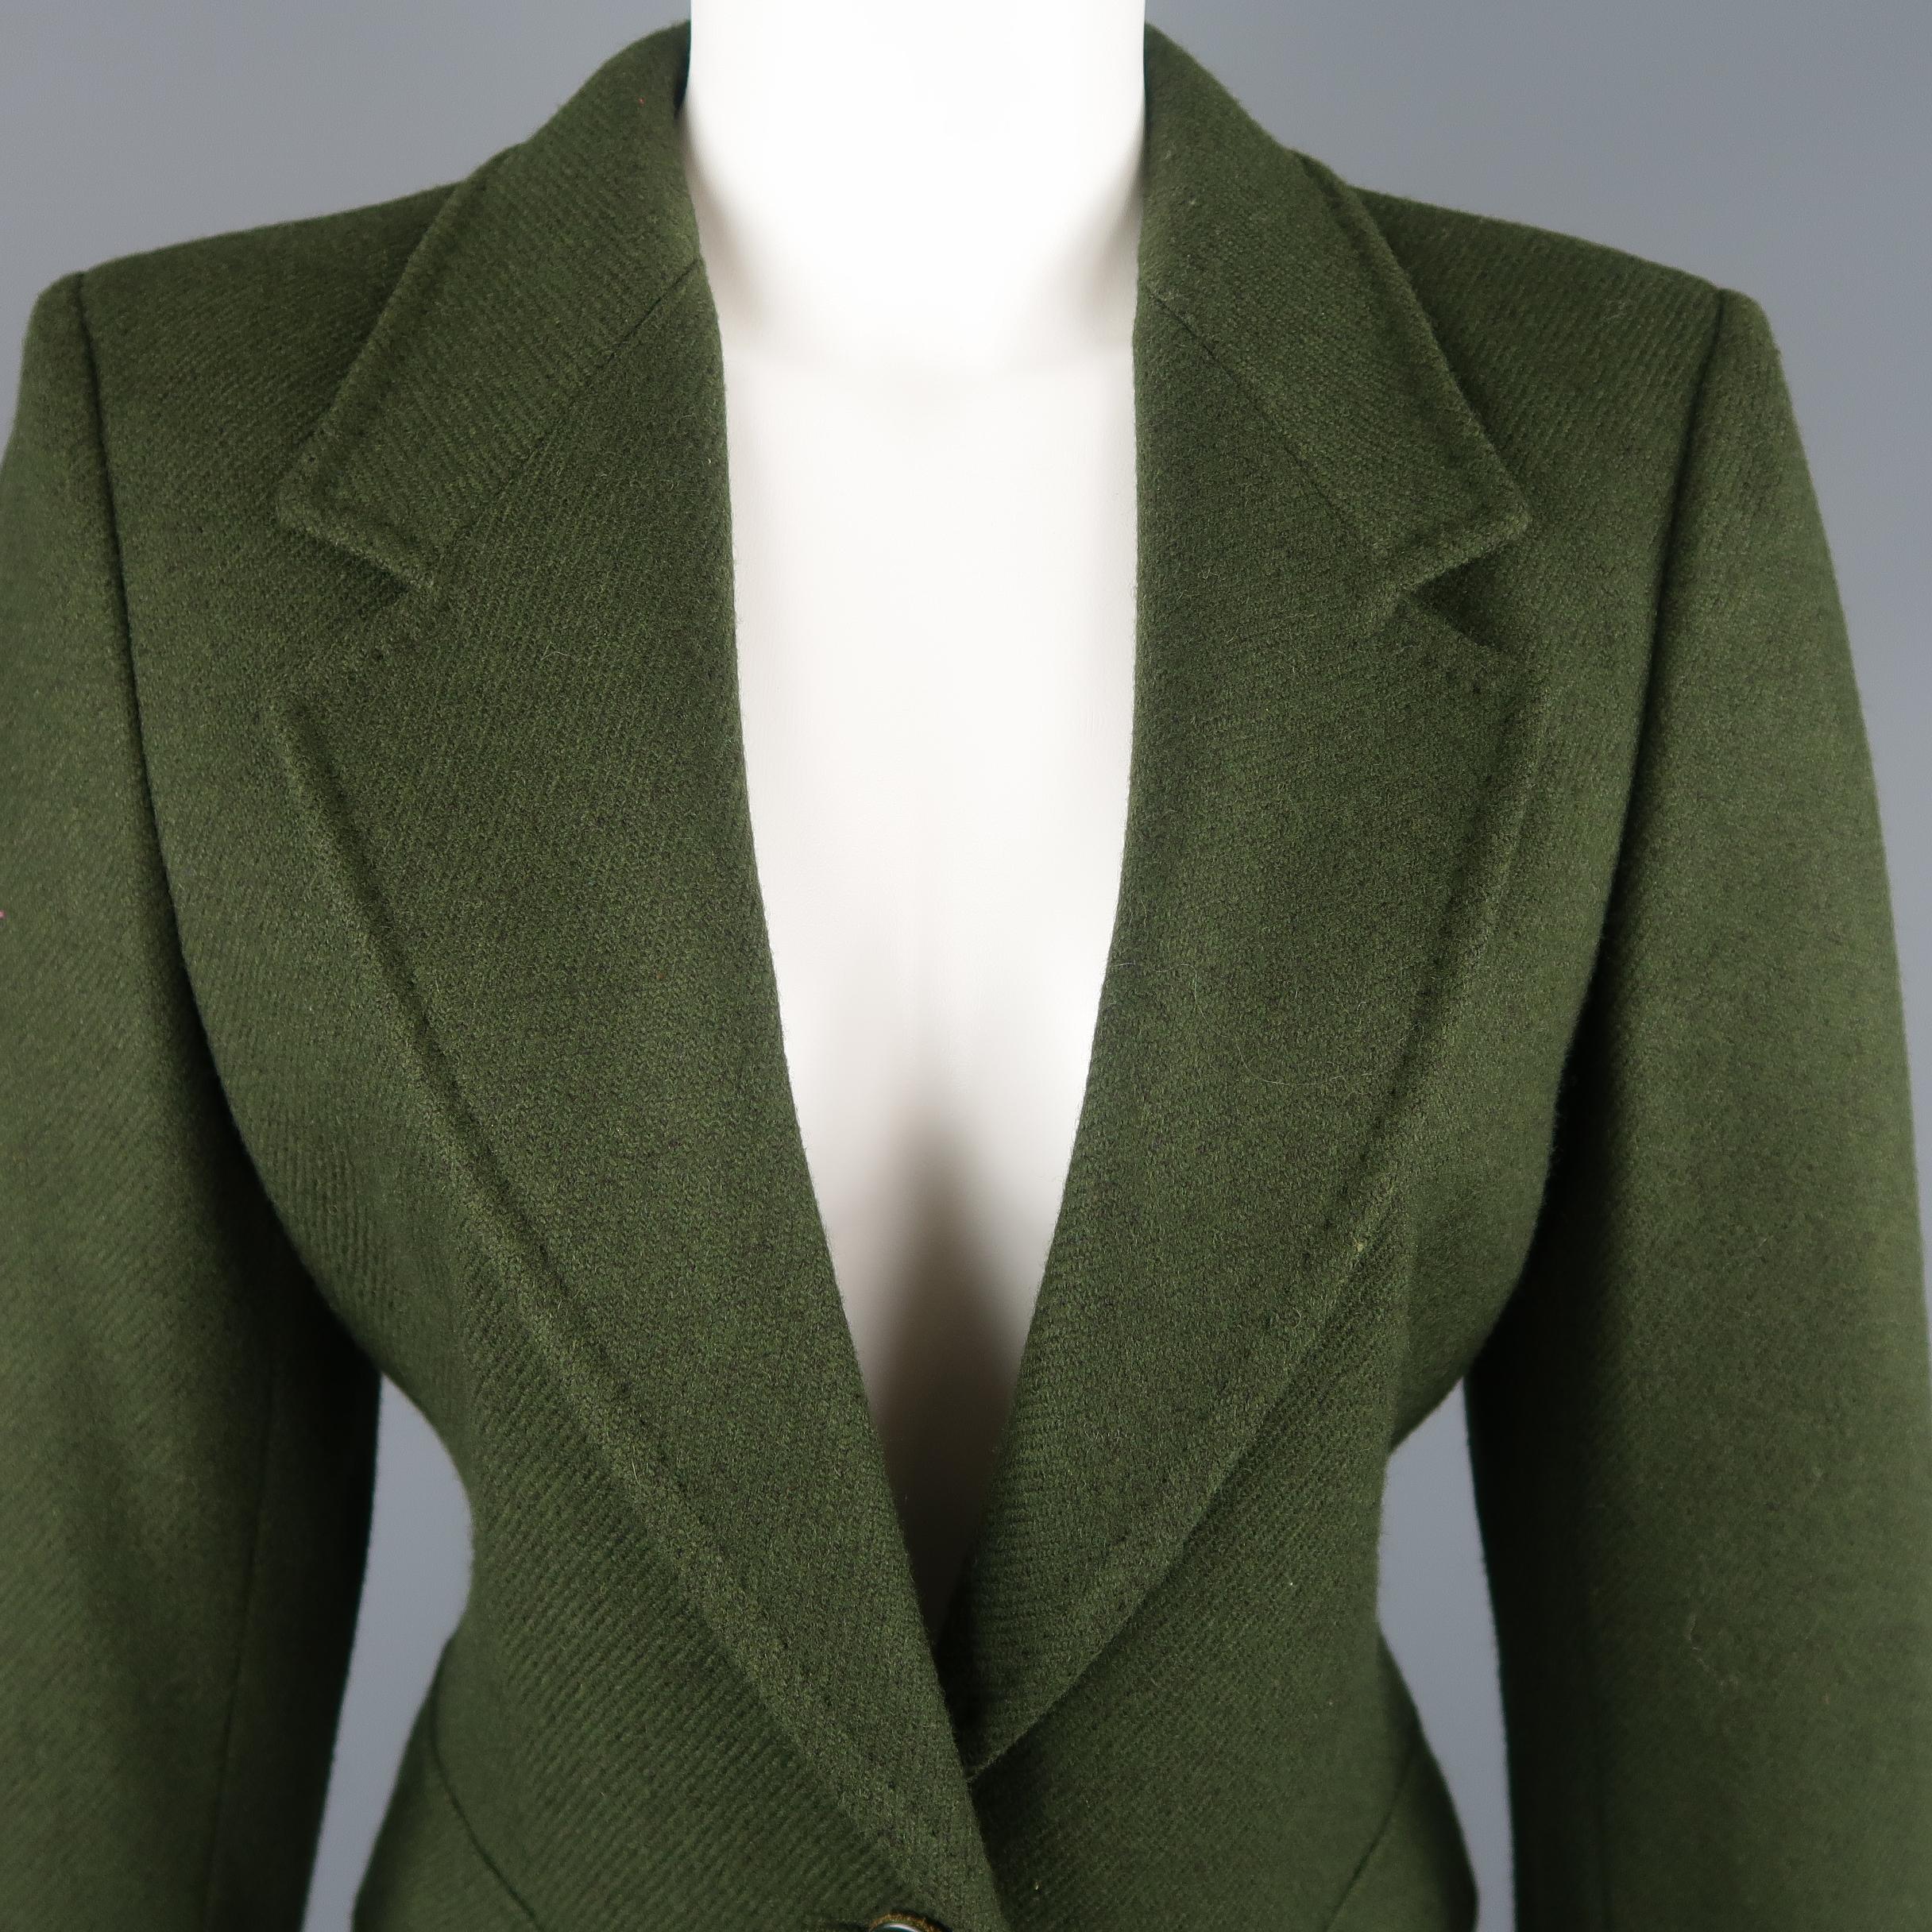 Max Mara blazer comes in green wool tweed with a notch lapel, single gold tone button closure, and patch flap pockets. Made in Italy.
 
Good Pre-Owned Condition.
Marked: US 6
 
Measurements:
 
Shoulder: 16 in.
Chest: 35 in.
Sleeve: 22 in.
Length: